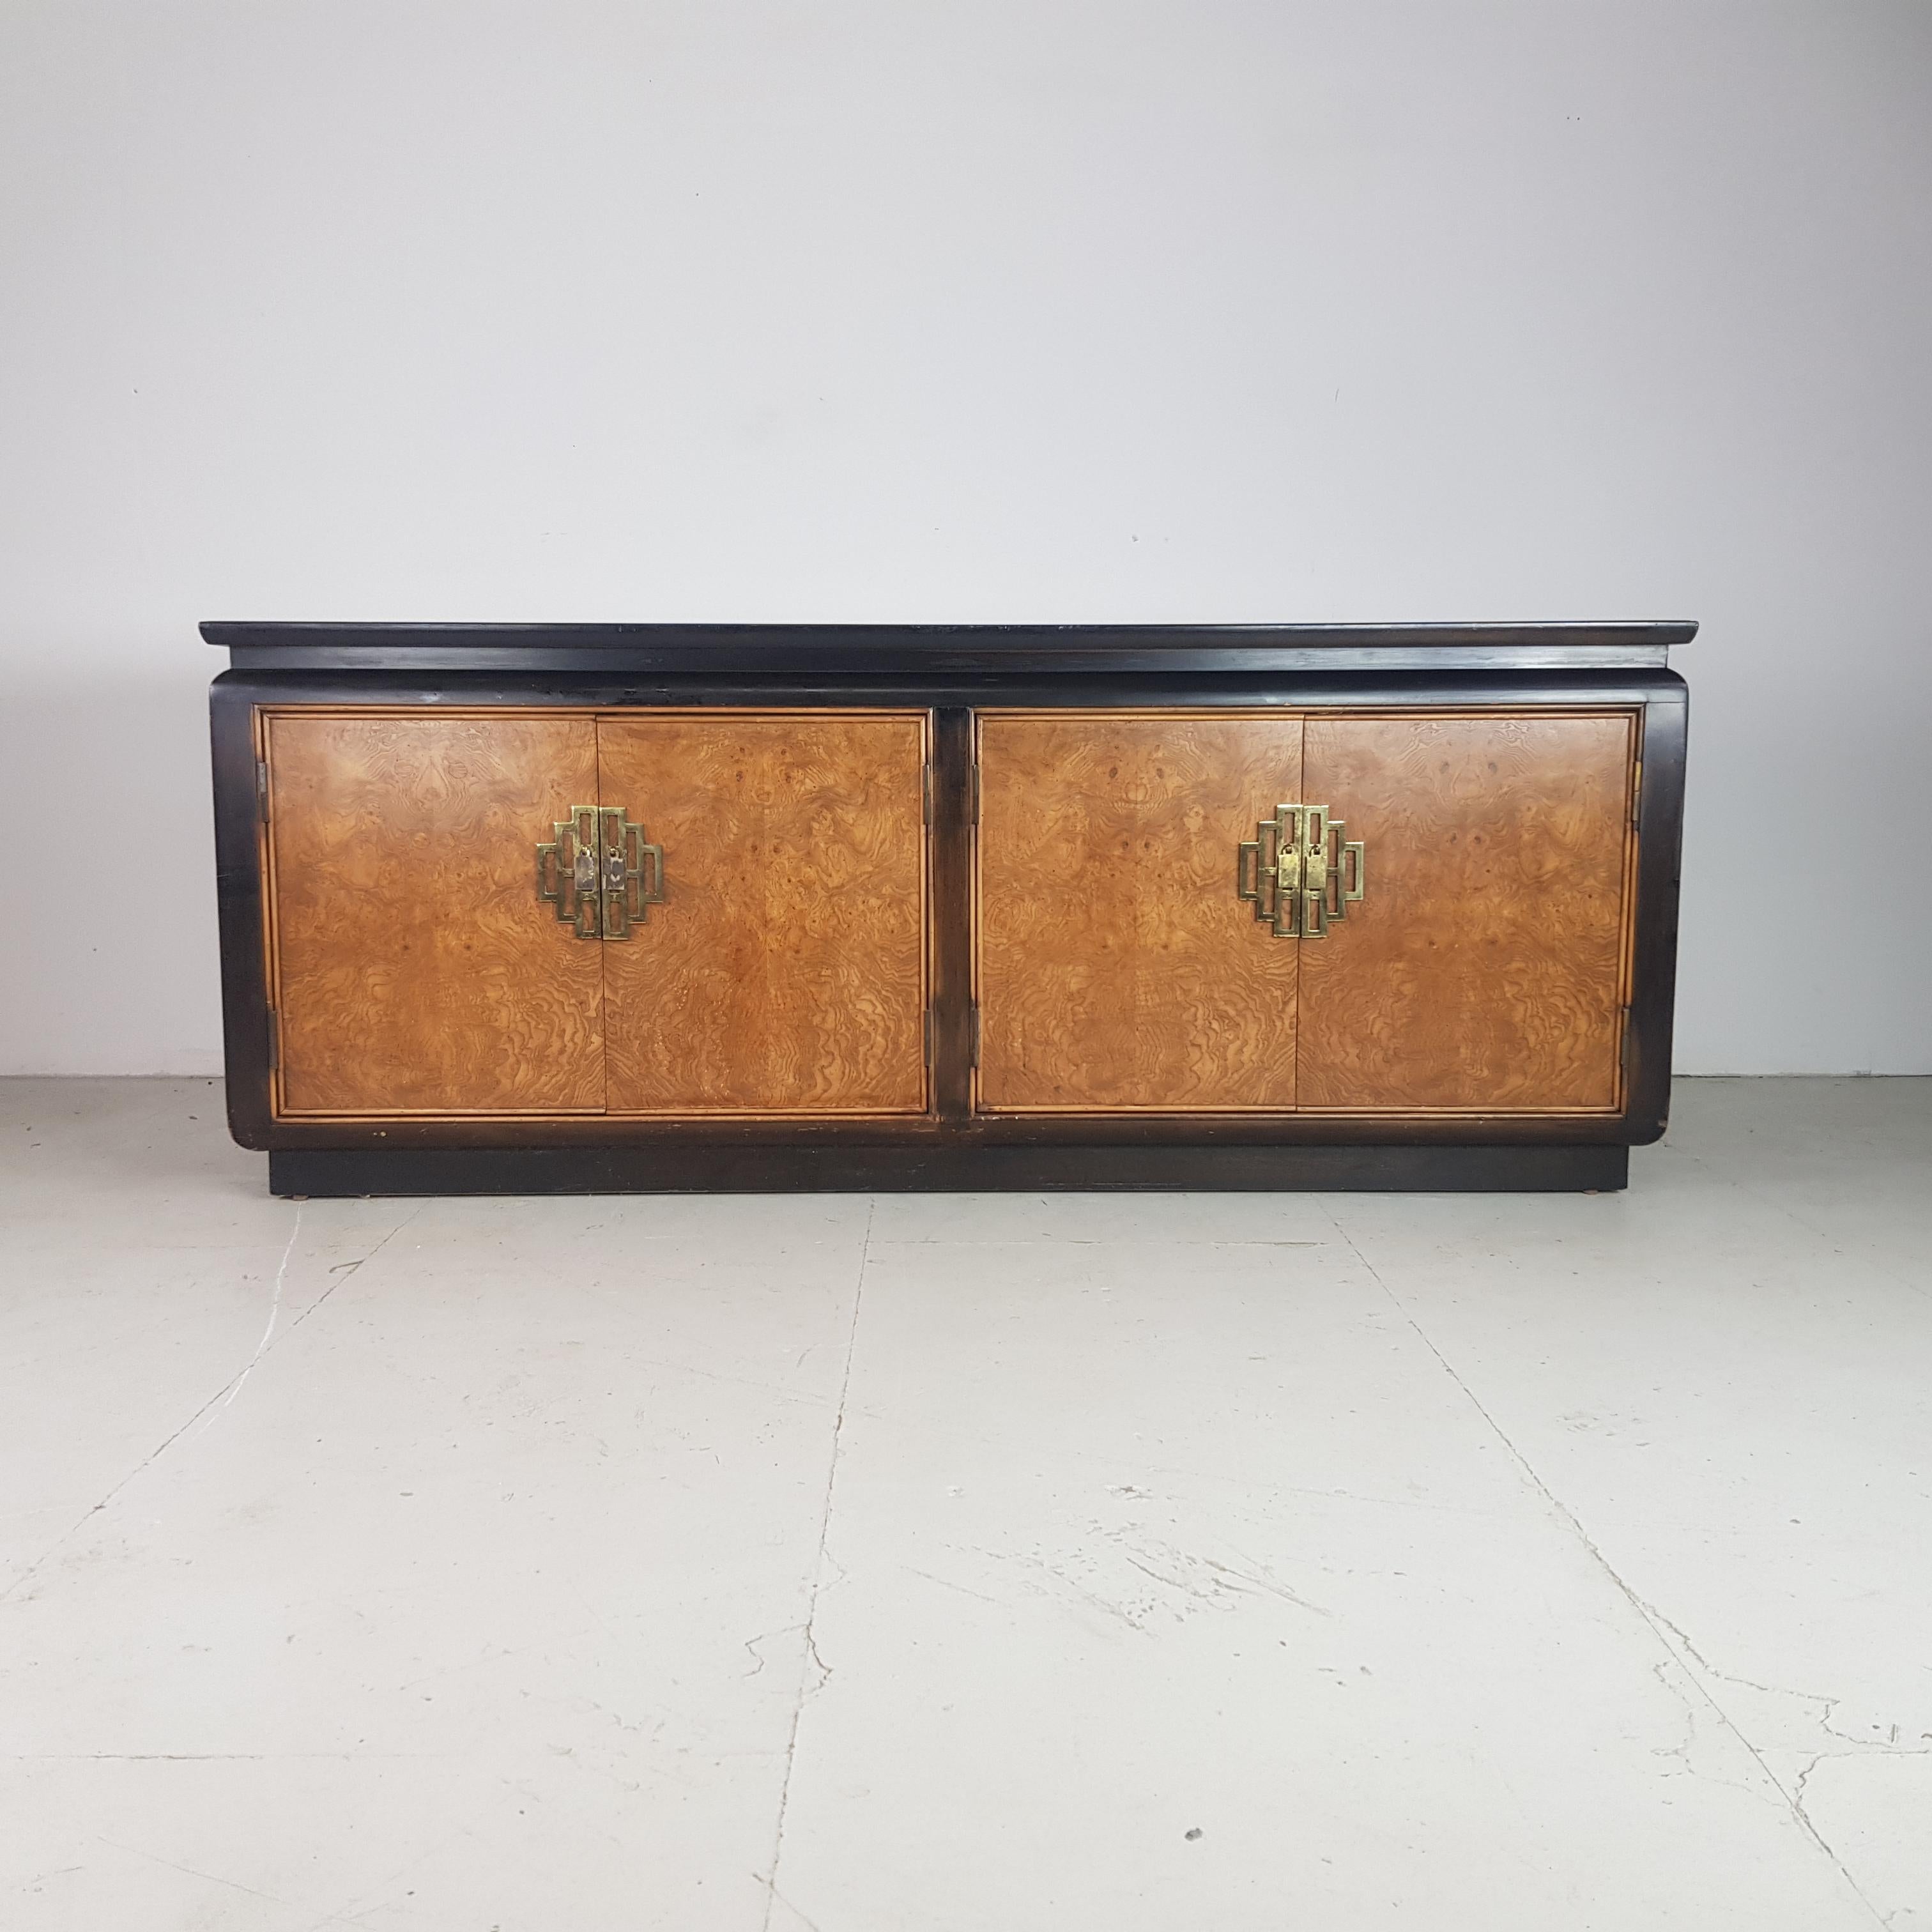 Very glamorous Hollywood Regency chinoiserie sideboard made by Century Furniture and purchased from Harrods in the 1970s. Made of black lacquer and burl wood with brass handles.

In vintage condition. Two of the internal drawers are missing but